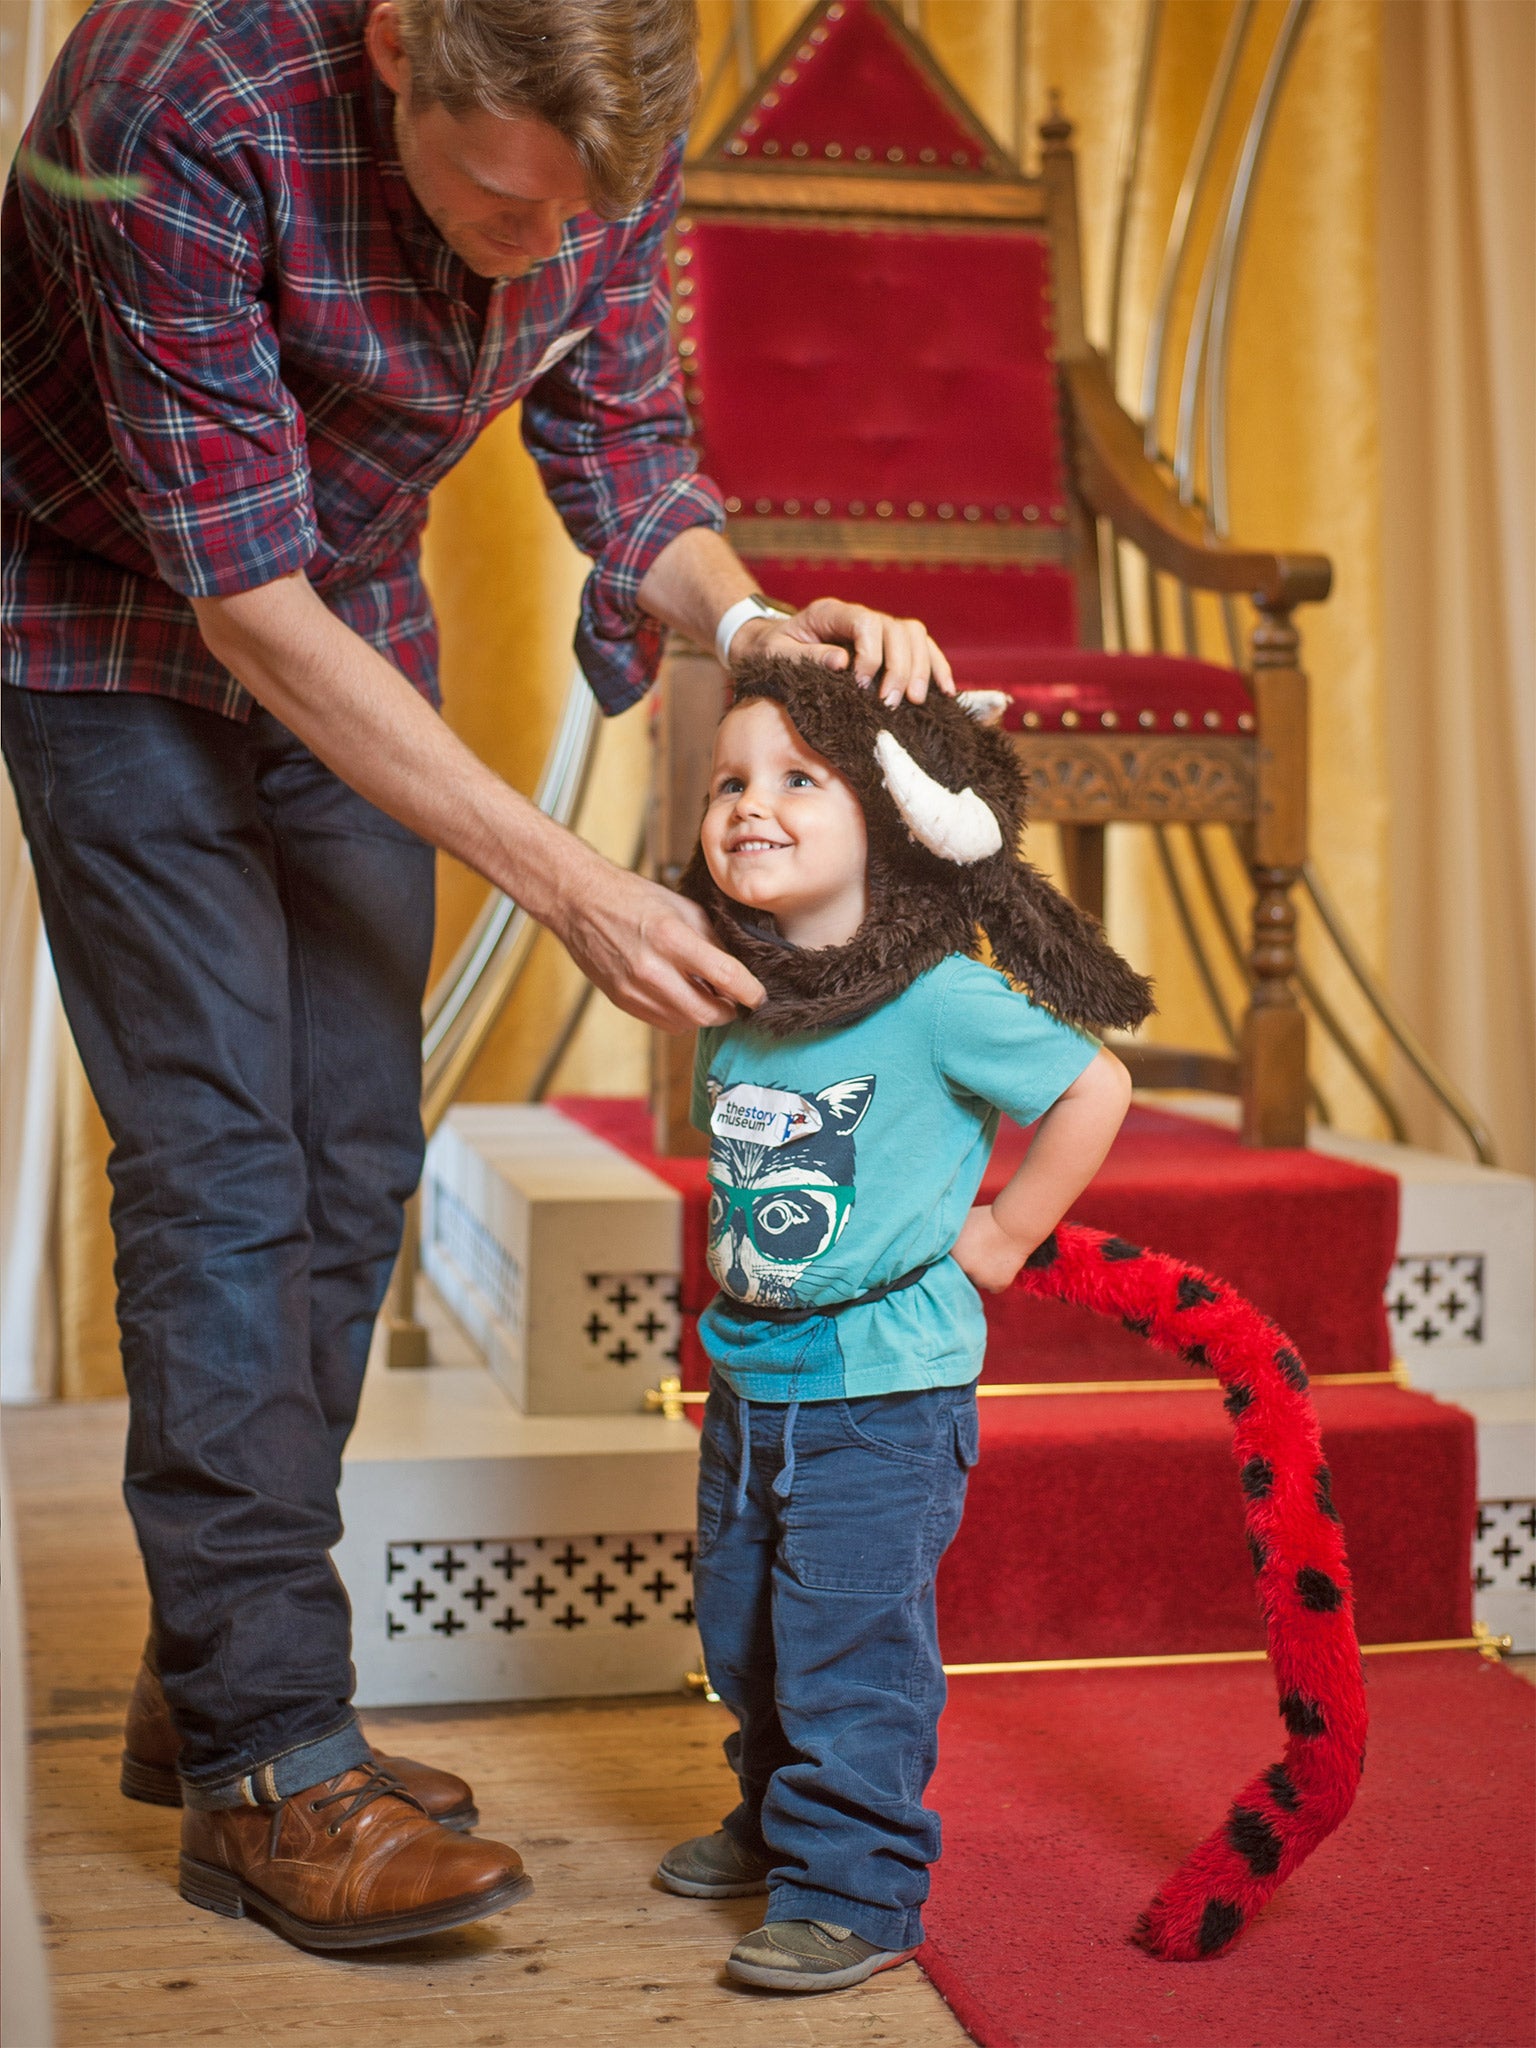 Animal magic: Dressing up at the Story Museum